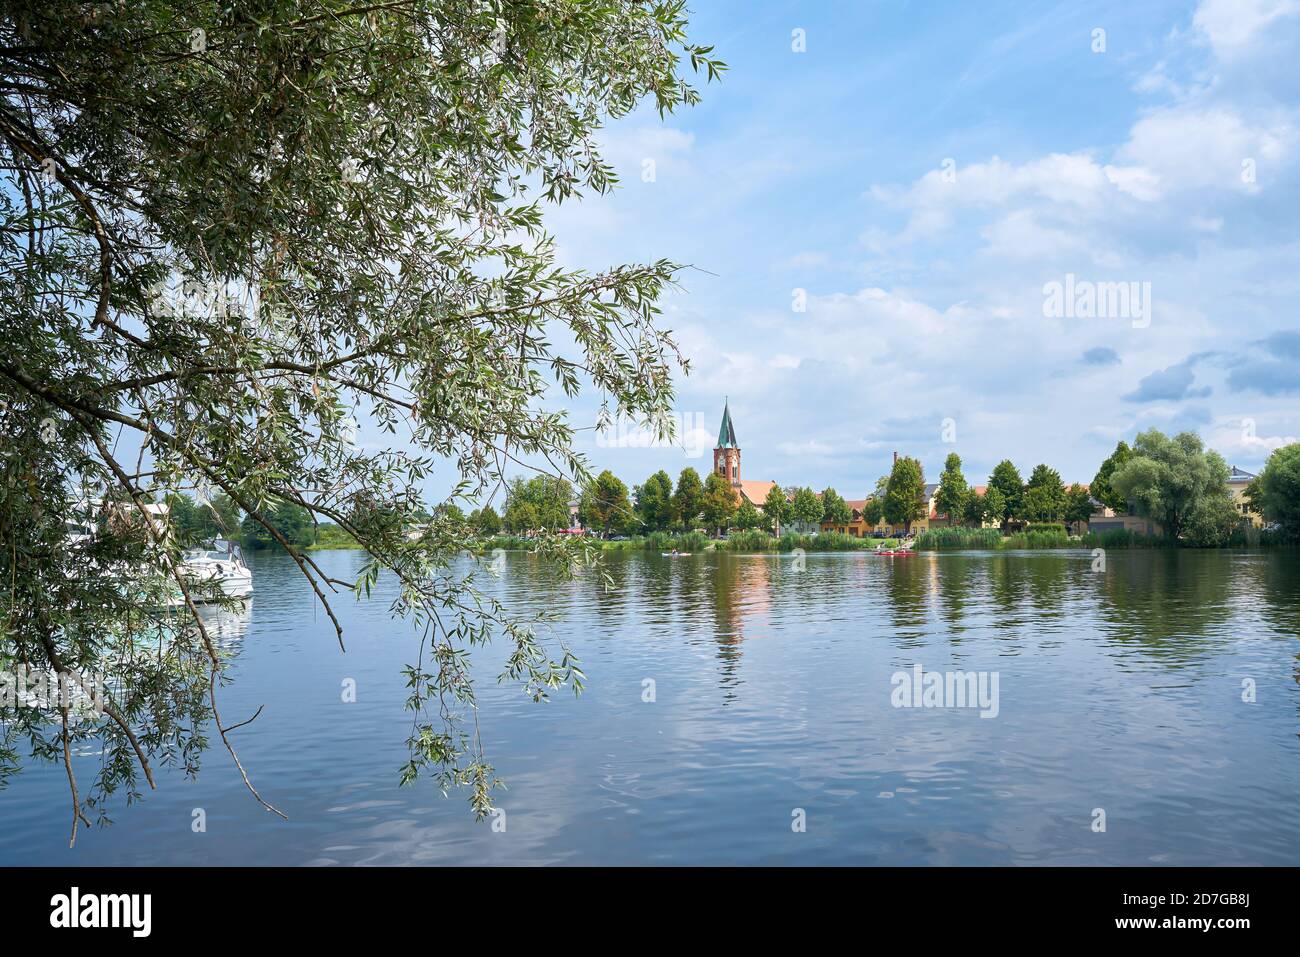 View of Werder island on the river Havel near Potsdam in Germany Stock Photo